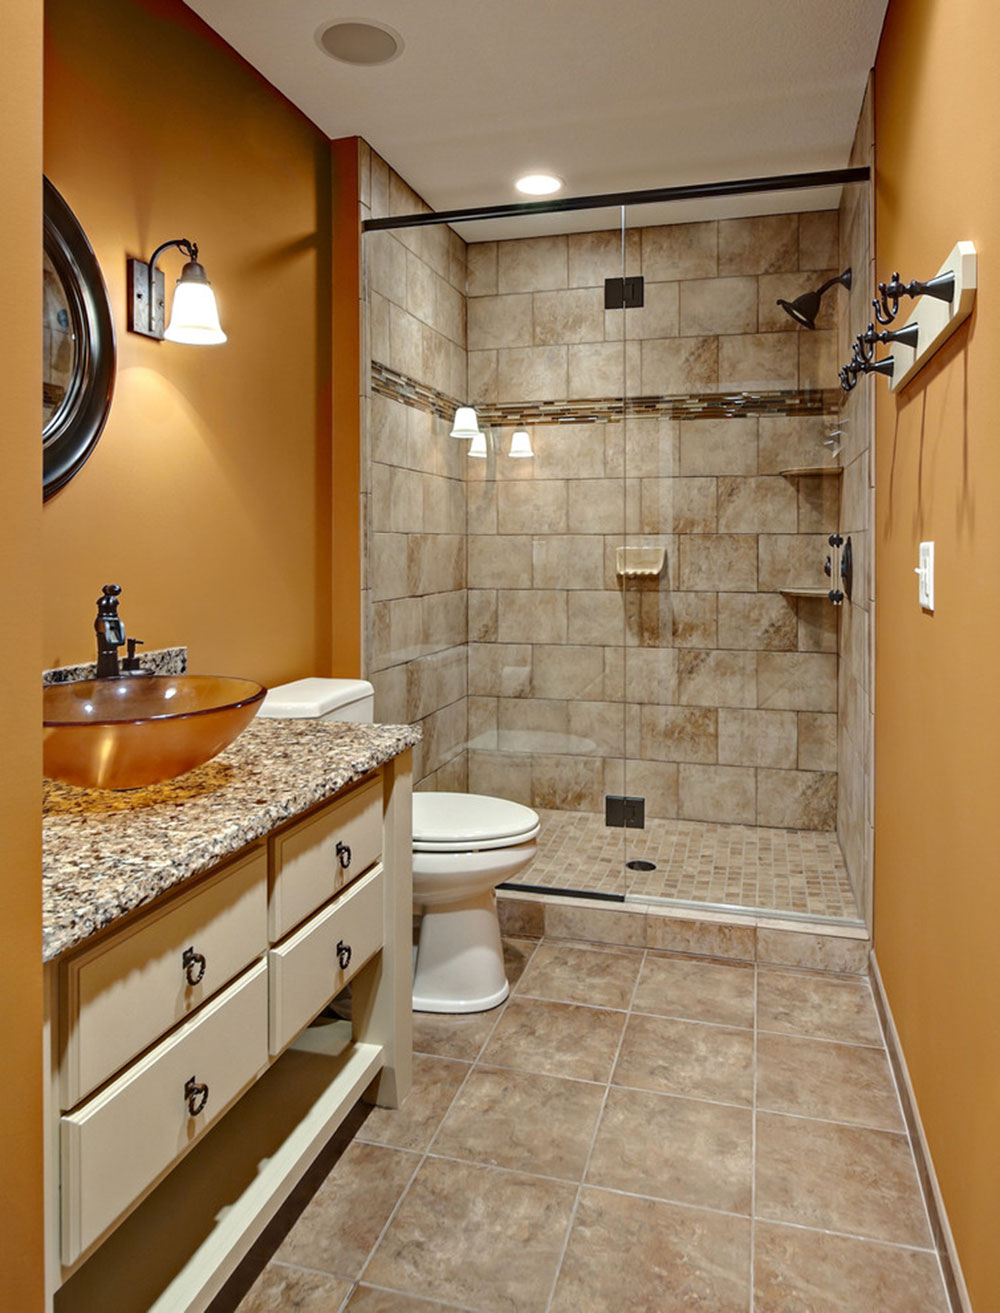 Cost To Add A Bathroom In The Basement, How Much Does It Cost To Make A Bathroom In The Basement